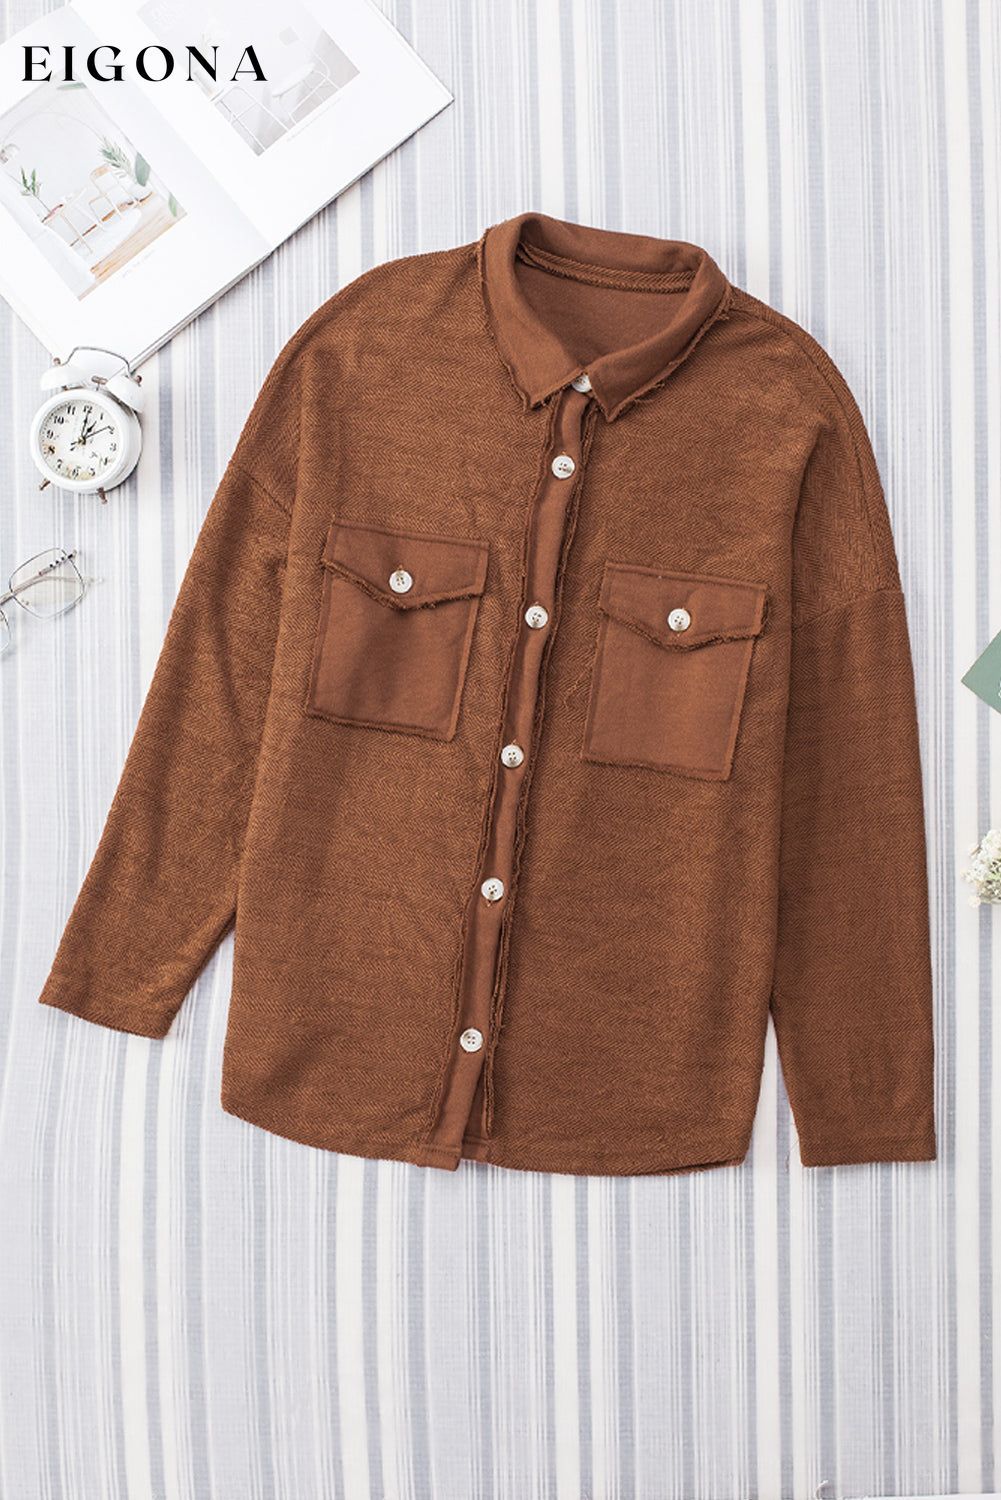 Brown Contrast Flap Pockets Relaxed Shacket All In Stock Best Sellers Category Shacket clothes DL Chic DL Exclusive Hot picks jacket long sleeve shirts Occasion Daily Print Solid Color Season Winter shirt shirts Style Casual